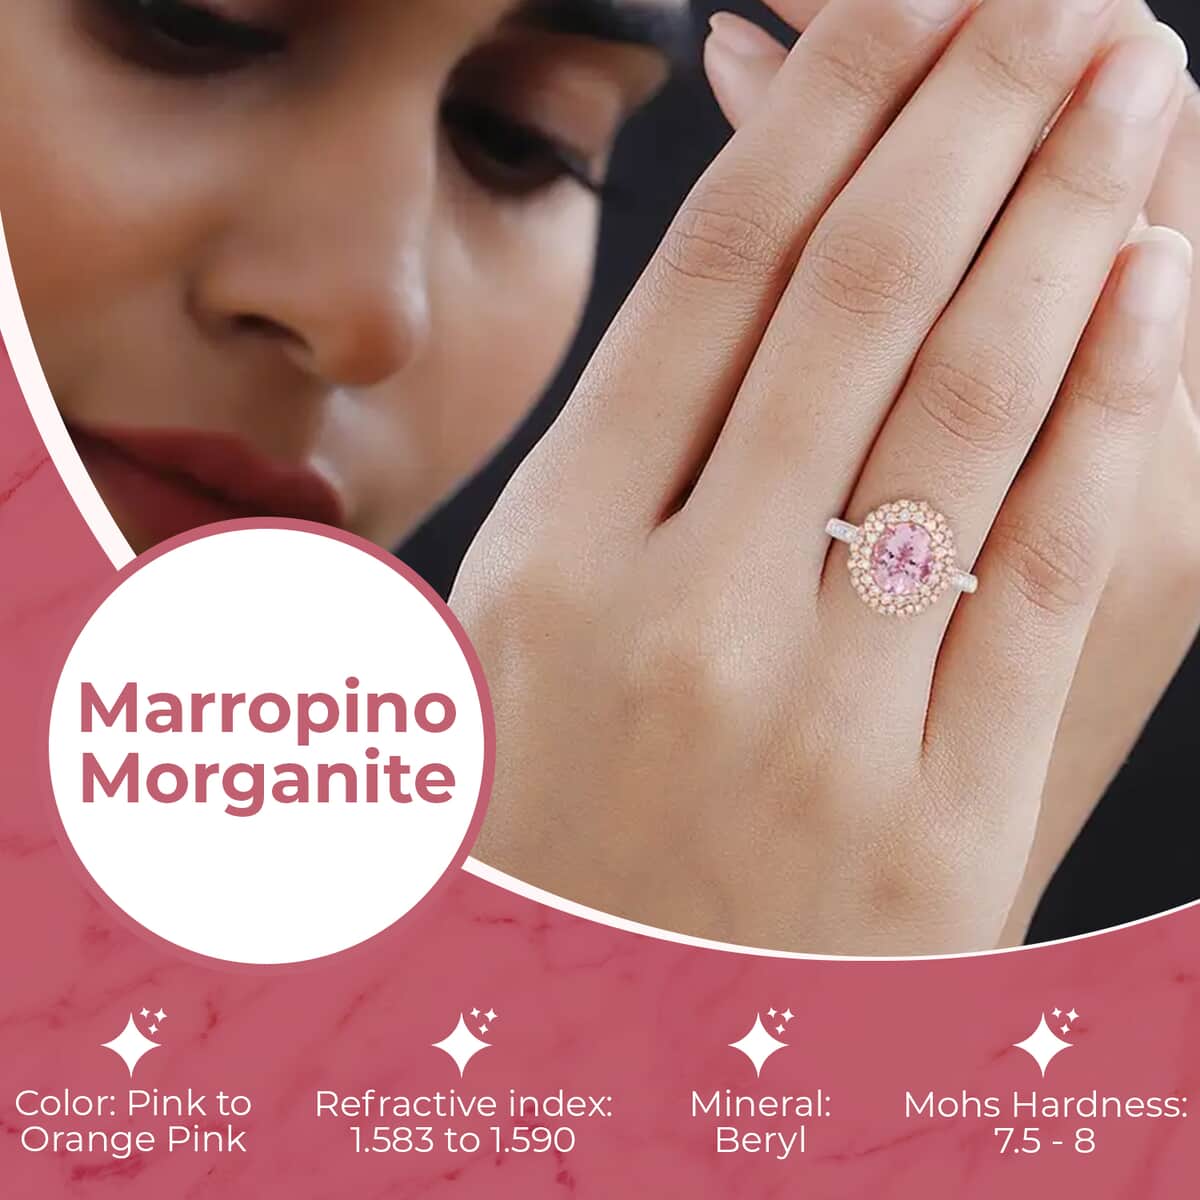 Ankur Treasure Chest Modani Marropino Morganite Ring, 14K Rose Gold Ring, Diamond Floral Halo Ring, Natural Pink And White Diamond Accent Ring, Promise Rings 1.95 ctw (Size 7.0) image number 2